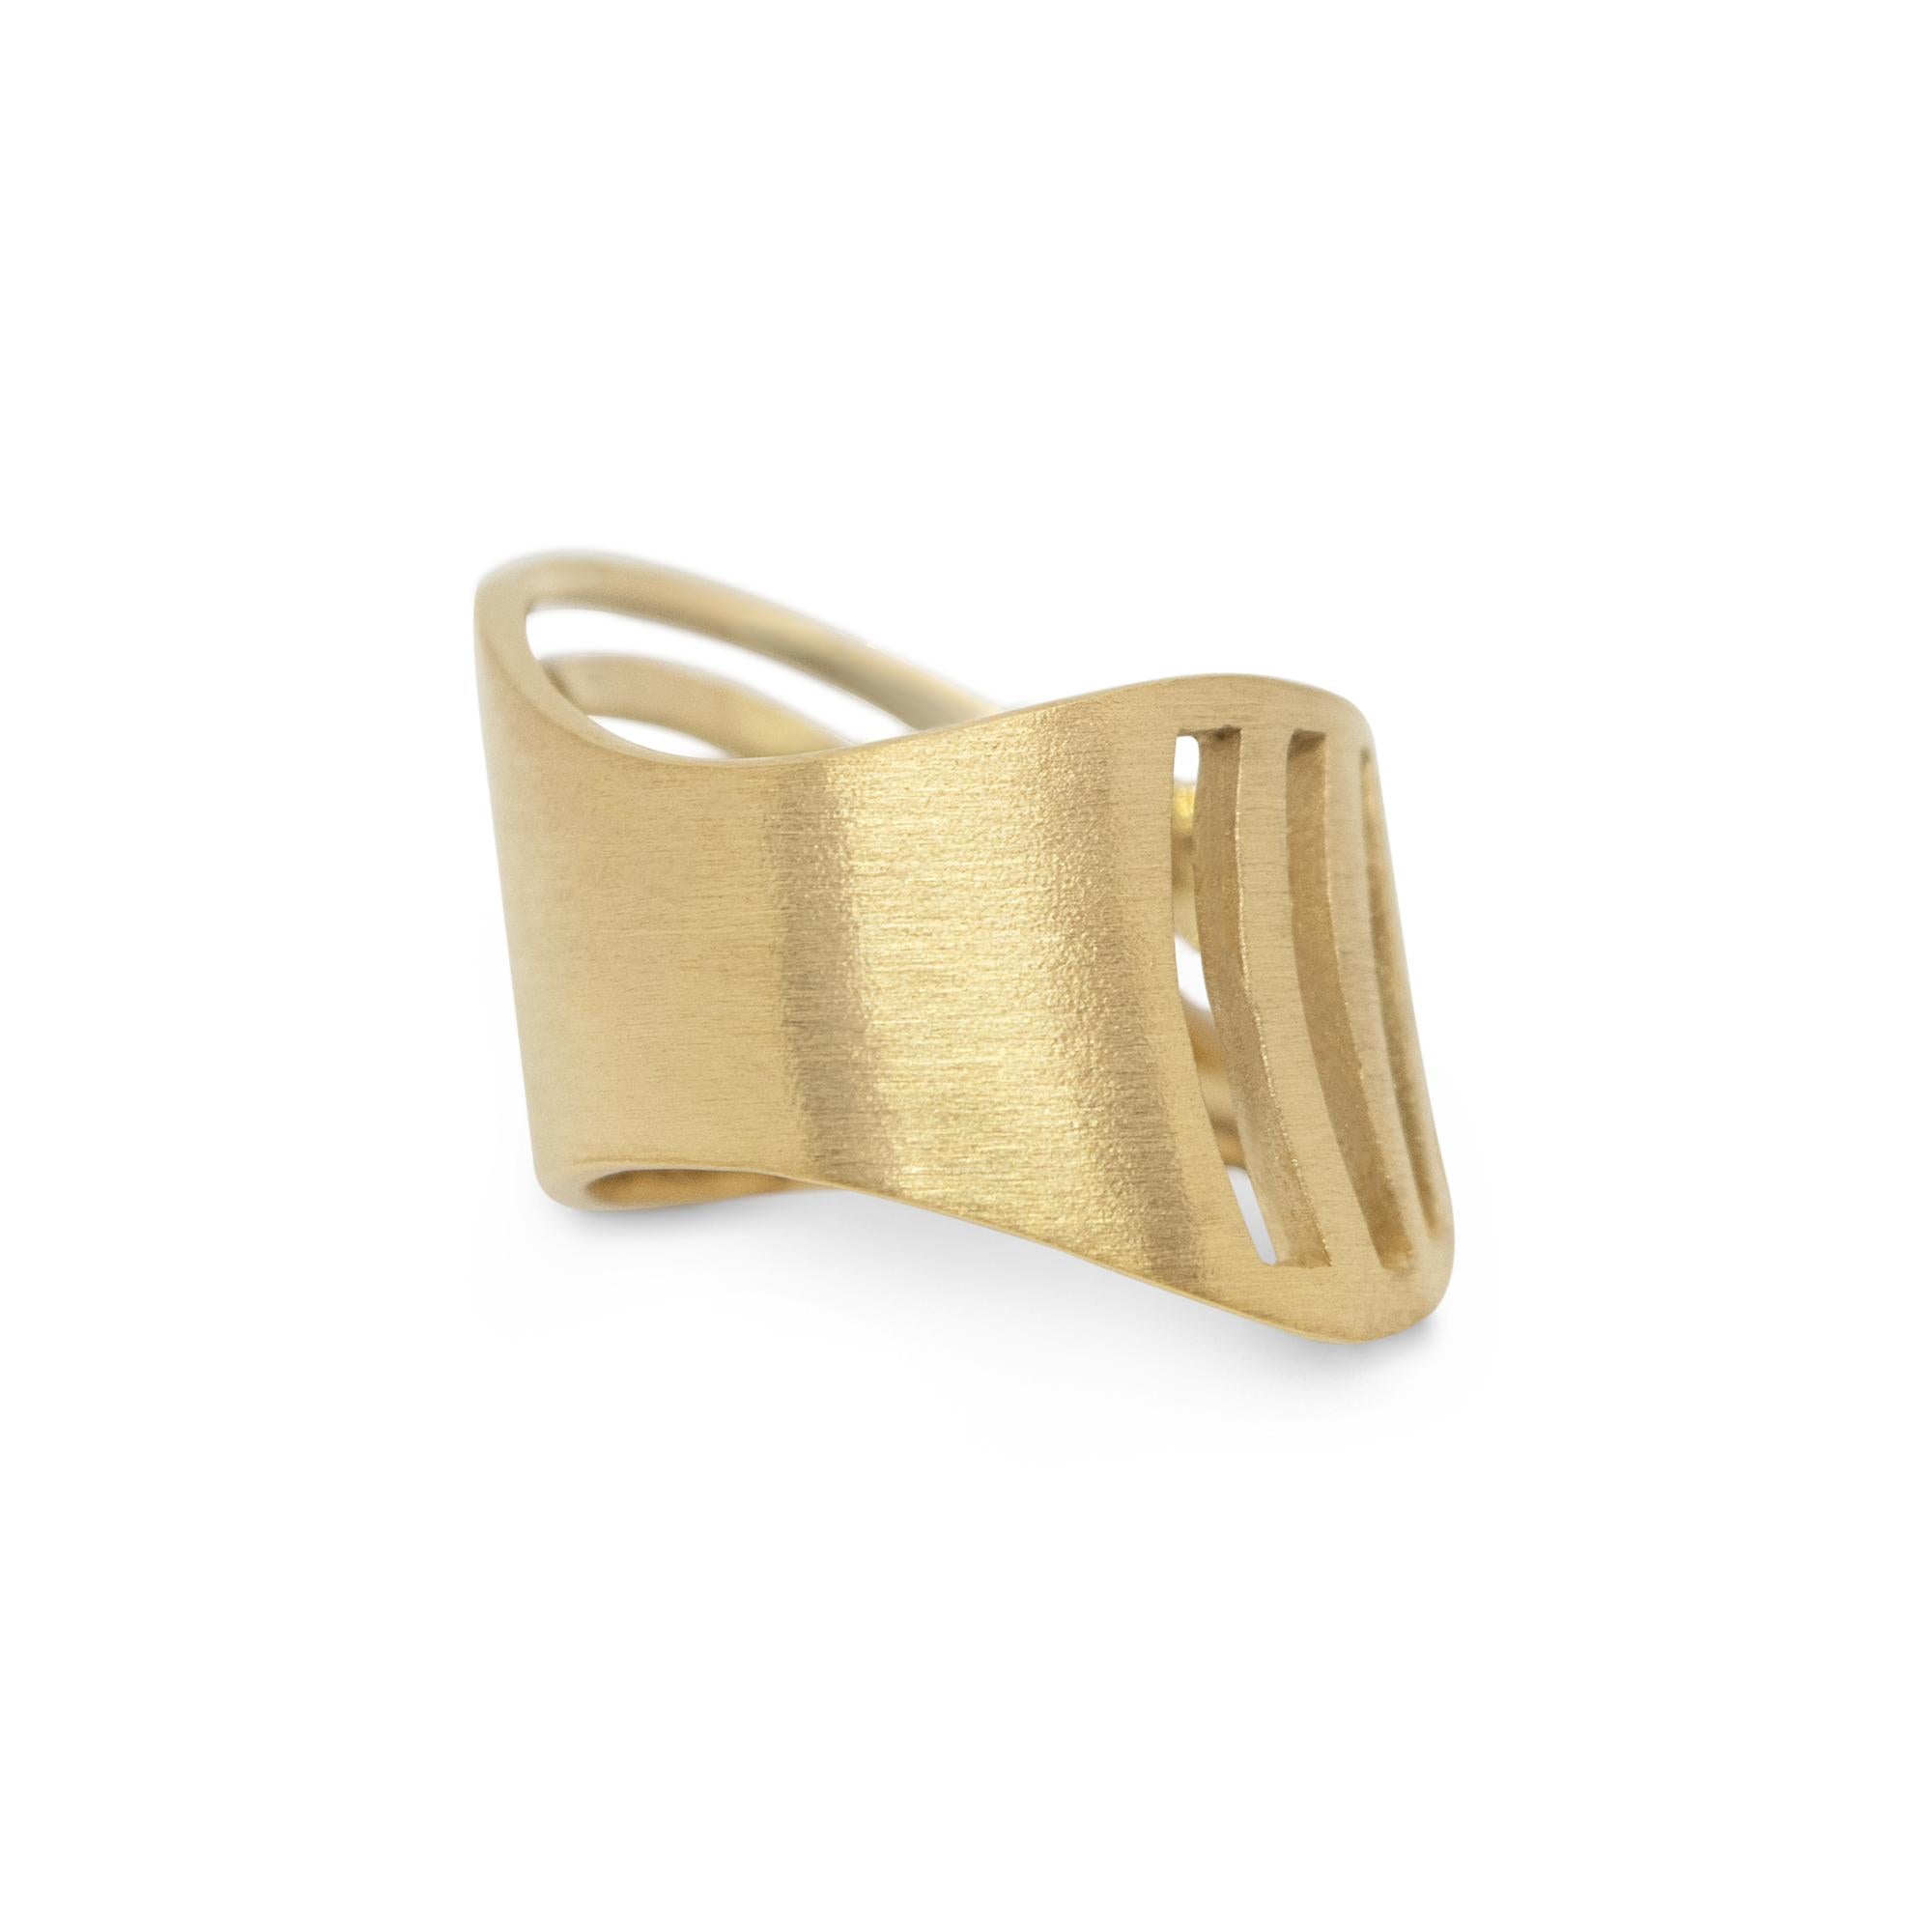 Unisex band ring in yellow gold vermeil. Perfect worn solo or horizontally stacked with multiple rings from the collection. This unique piece has cut-outs in an abstract fishbone pattern. Textured finish for an industrial-chic look.
Dimensions: 21.5